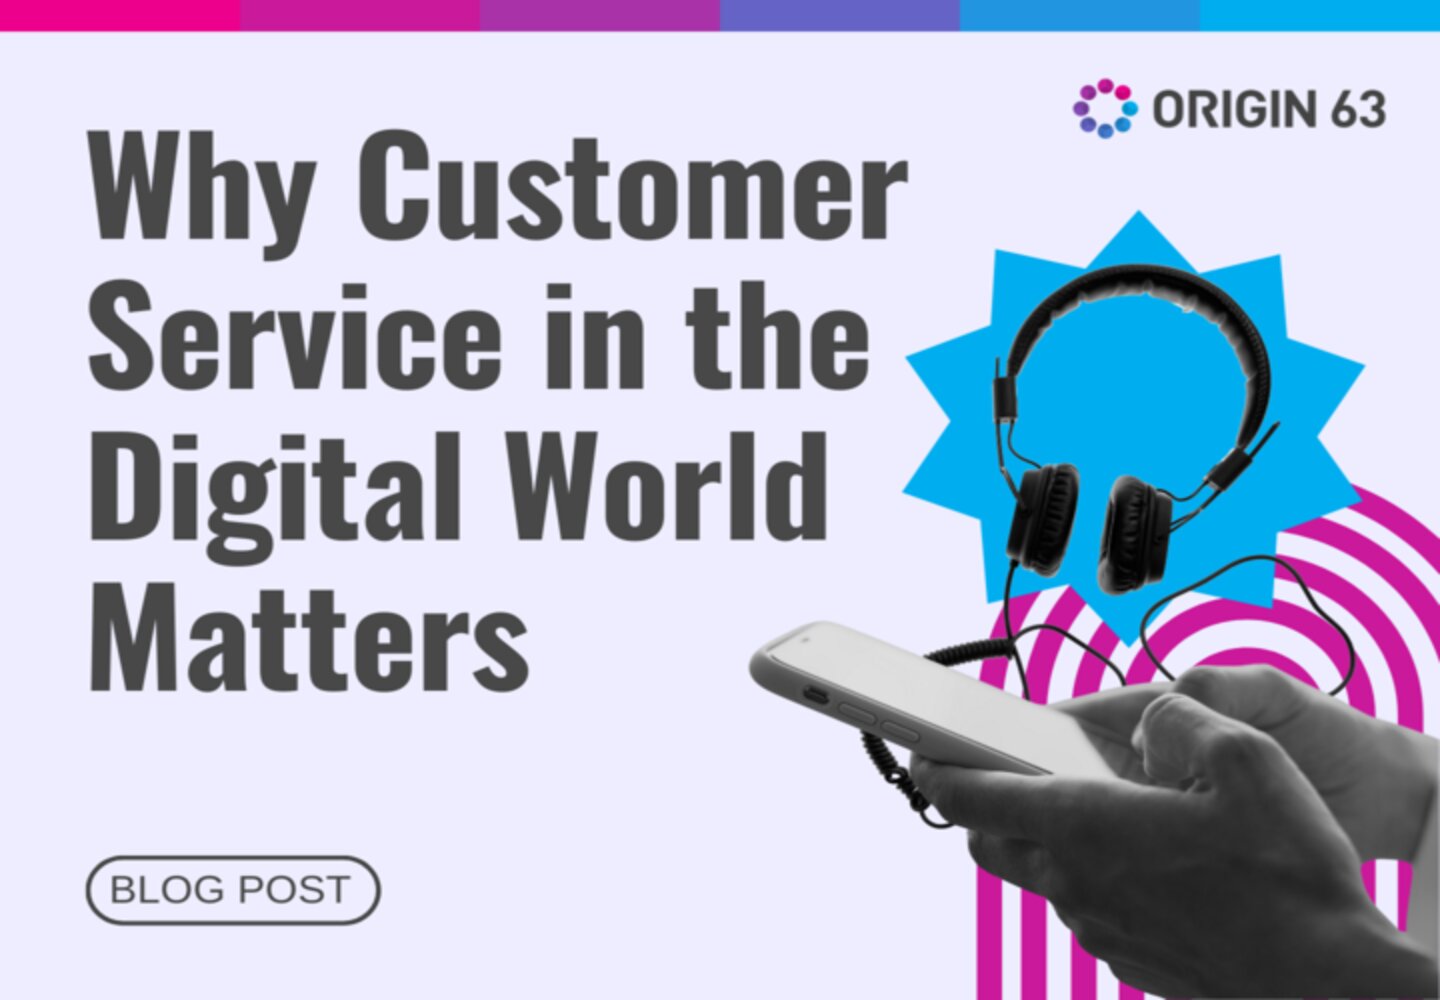 Why Customer Service in the Digital World Matters